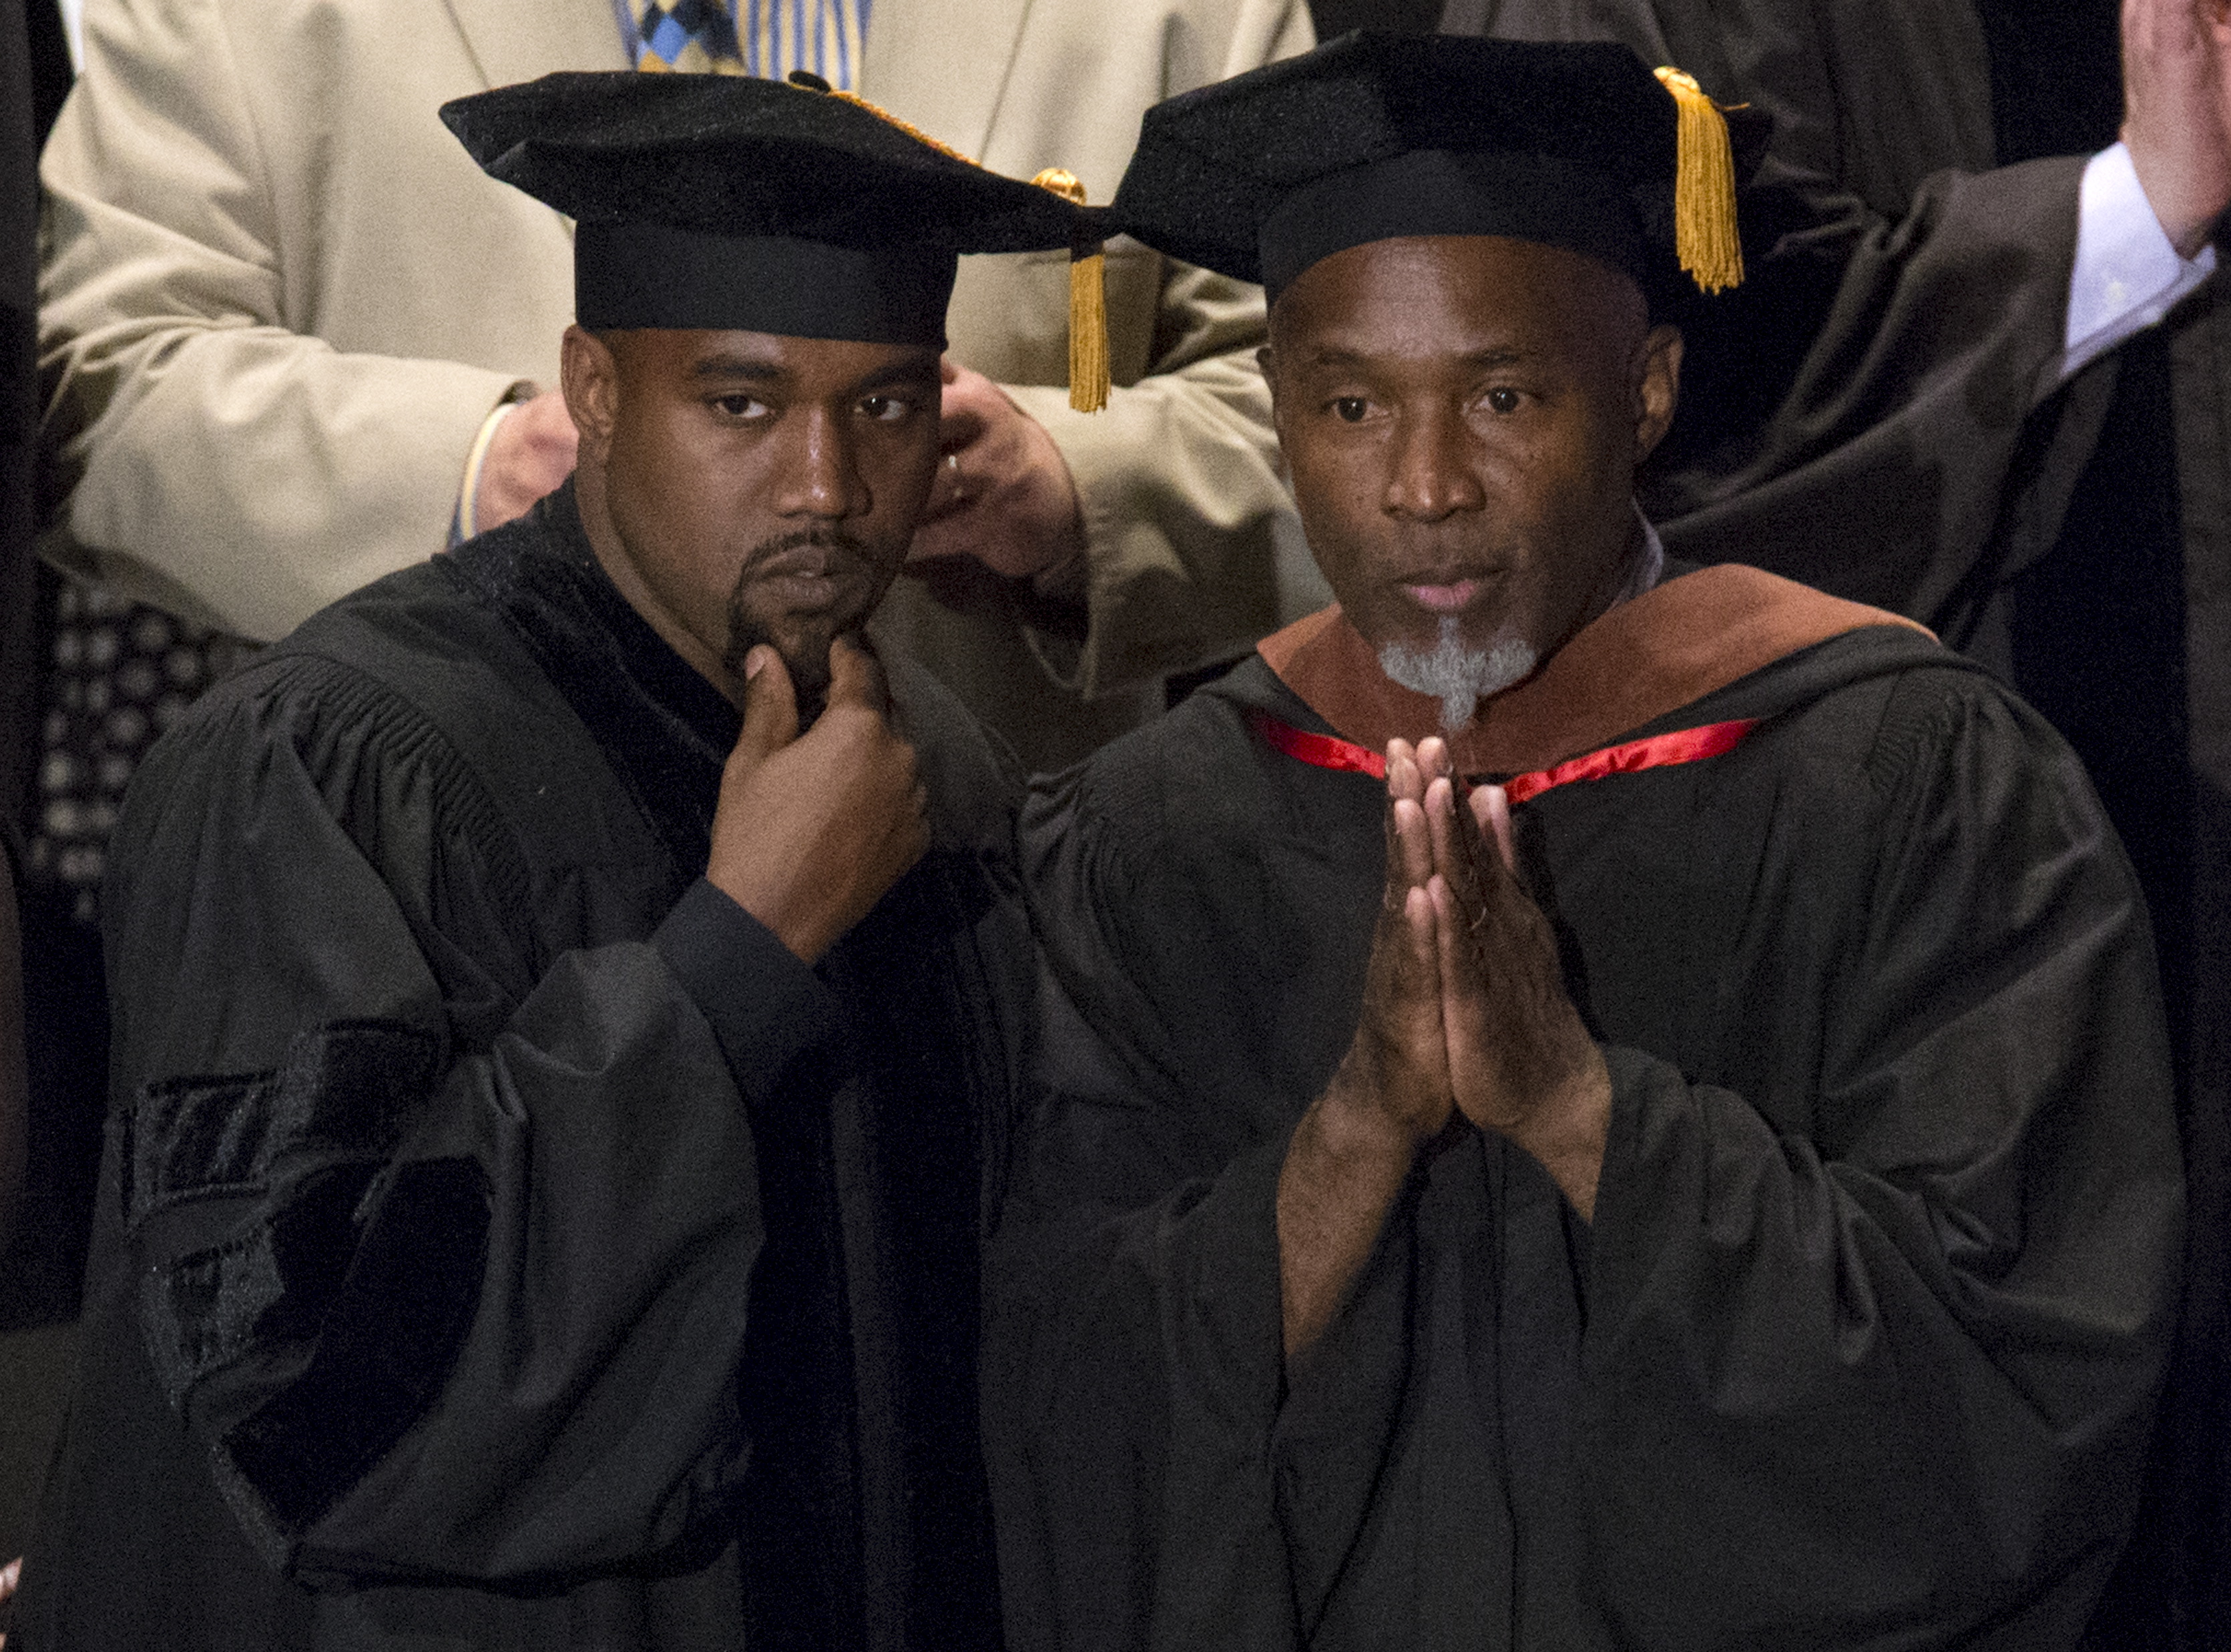 Musician Kanye West and School of the Art Institute of Chicago Professor Nick Cave attend the school's annual commencement ceremony where West received an honorary doctorate degree in Chicago, Illinois on May 11, 2015 (Jim Young—Reuters)